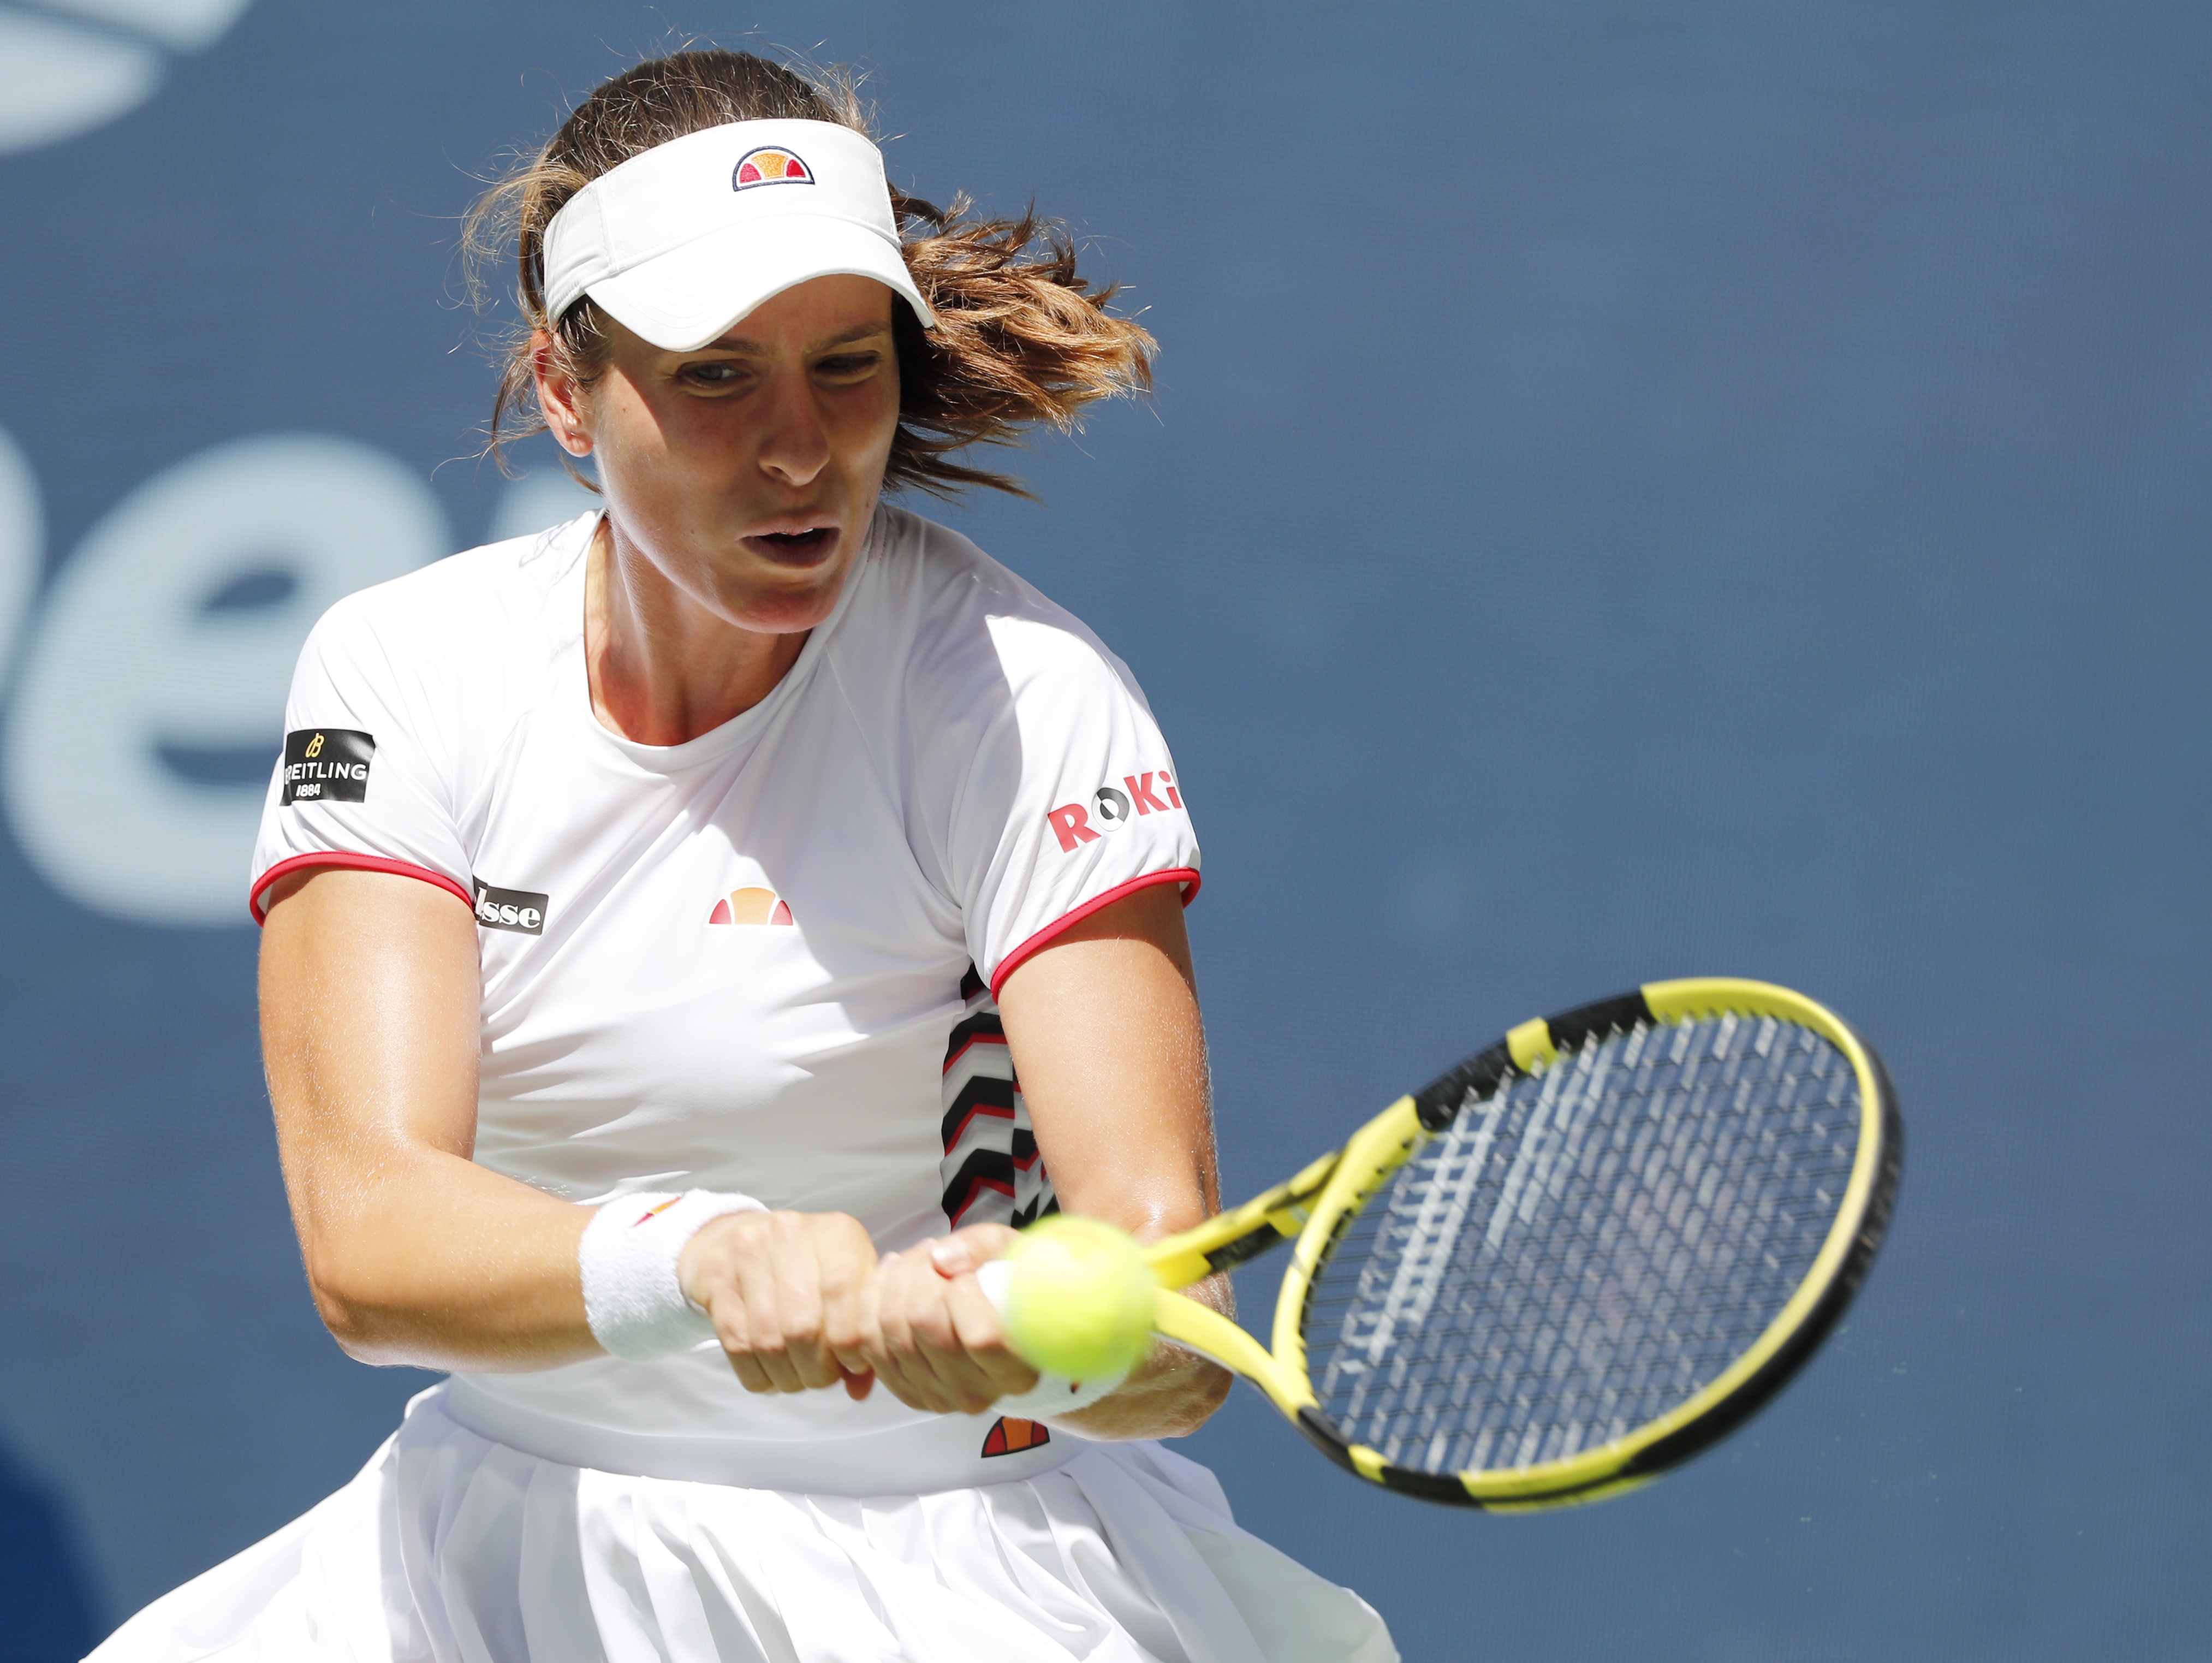 epa07815158 Johanna Konta of Great Britain hits a return to Elina Svitolina of Ukraine during their quarter-finals round match on the ninth day of the US Open Tennis Championships the USTA National Tennis Center in Flushing Meadows, New York, USA, 03 September 2019. The US Open runs from 26 August through 08 September.  EPA/JUSTIN LANE